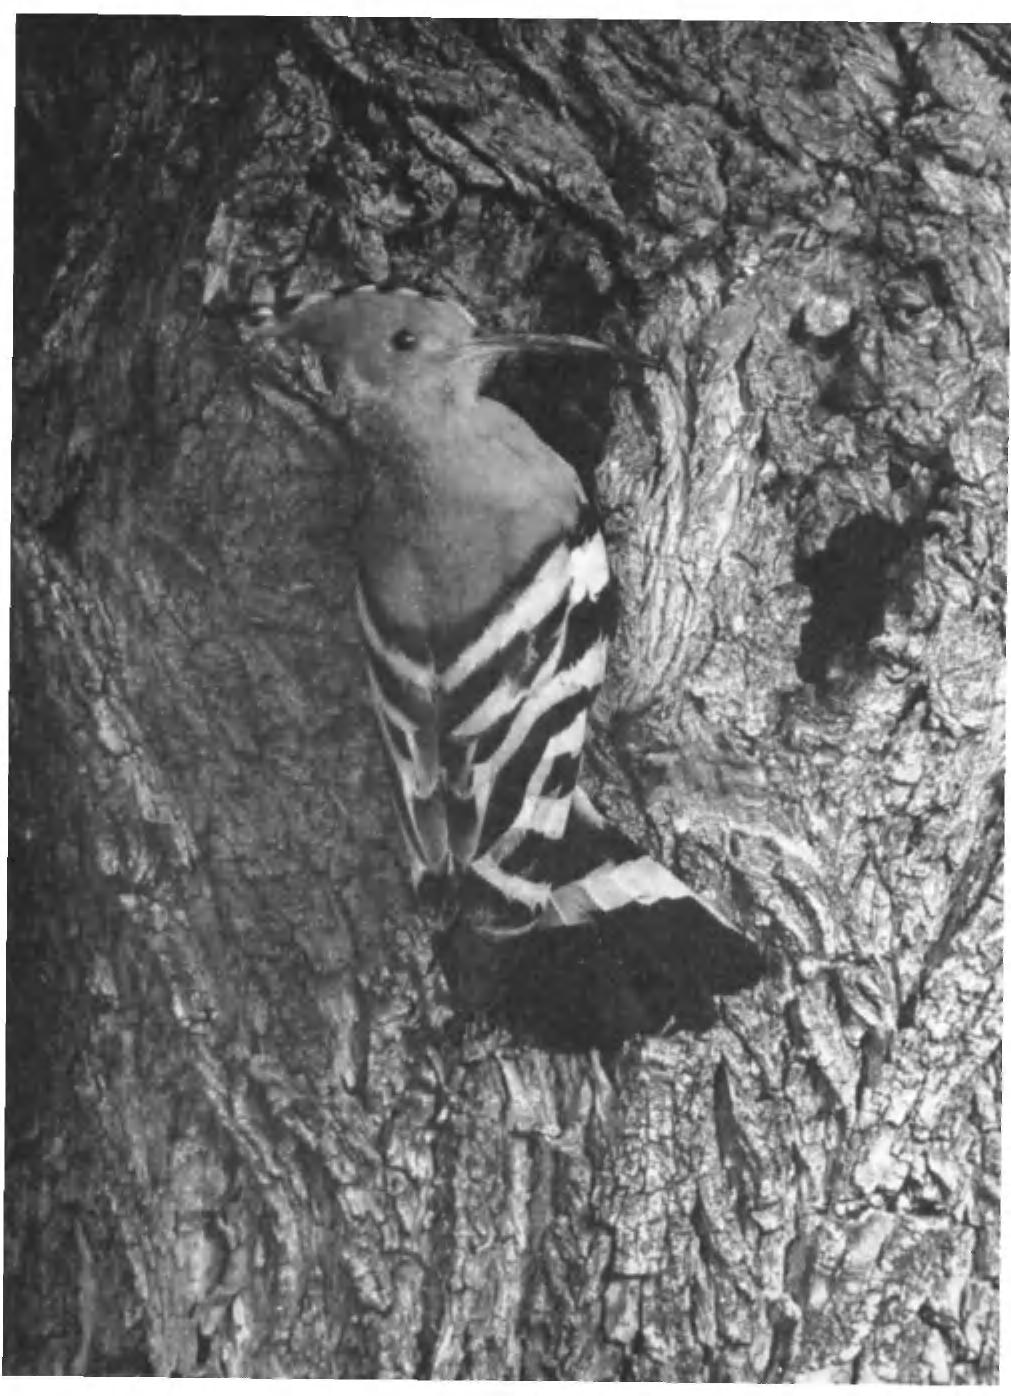 PLATE 47 ADULT HOOPOE (Upupa epops) AT NEST-HOLE CAMARGUE, SOUTH FRANCE, May 1953 Note the pattern of black-and-white barring on the wings and tail and the corresponding barring of black and buff on